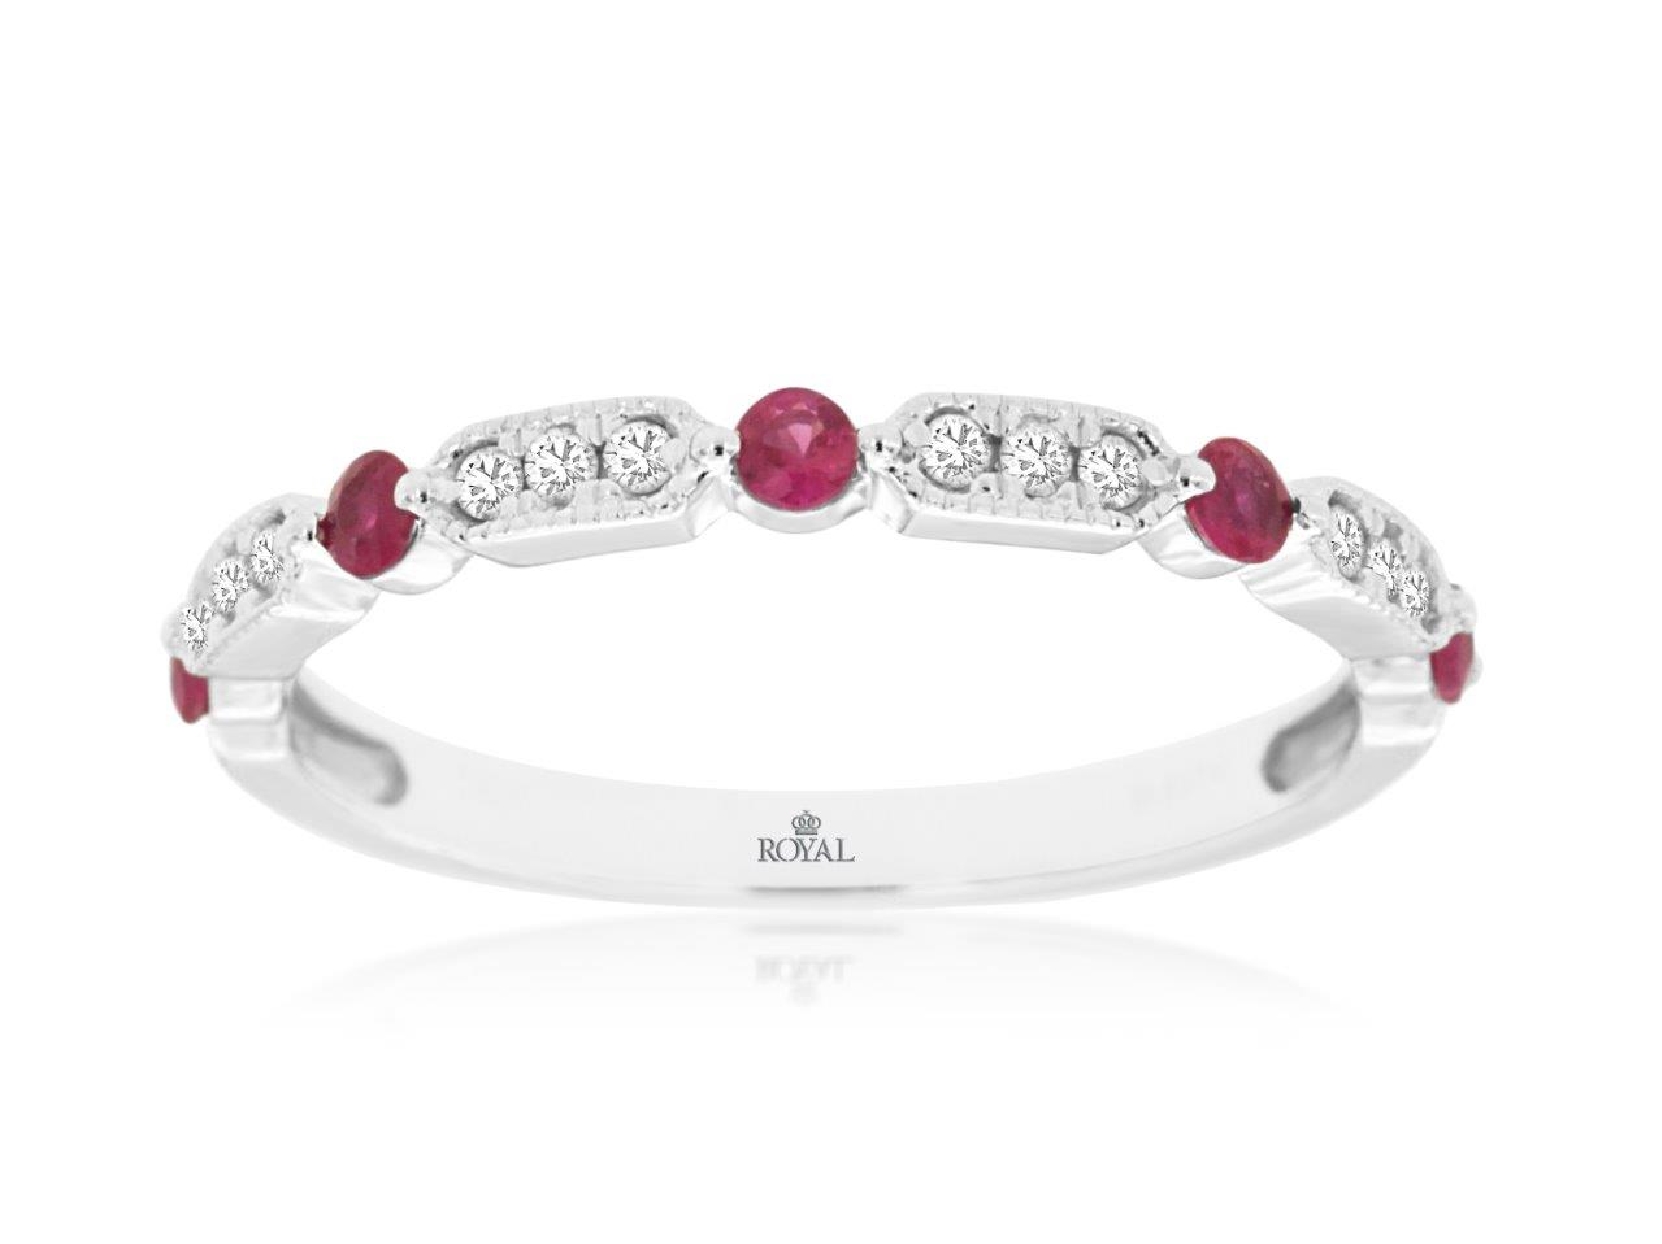 14K White Gold Band with Bezel Set Rubies and Channel Set Diamonds Size 7 .10CT Diamonds .25CT Rubies

WH1686R